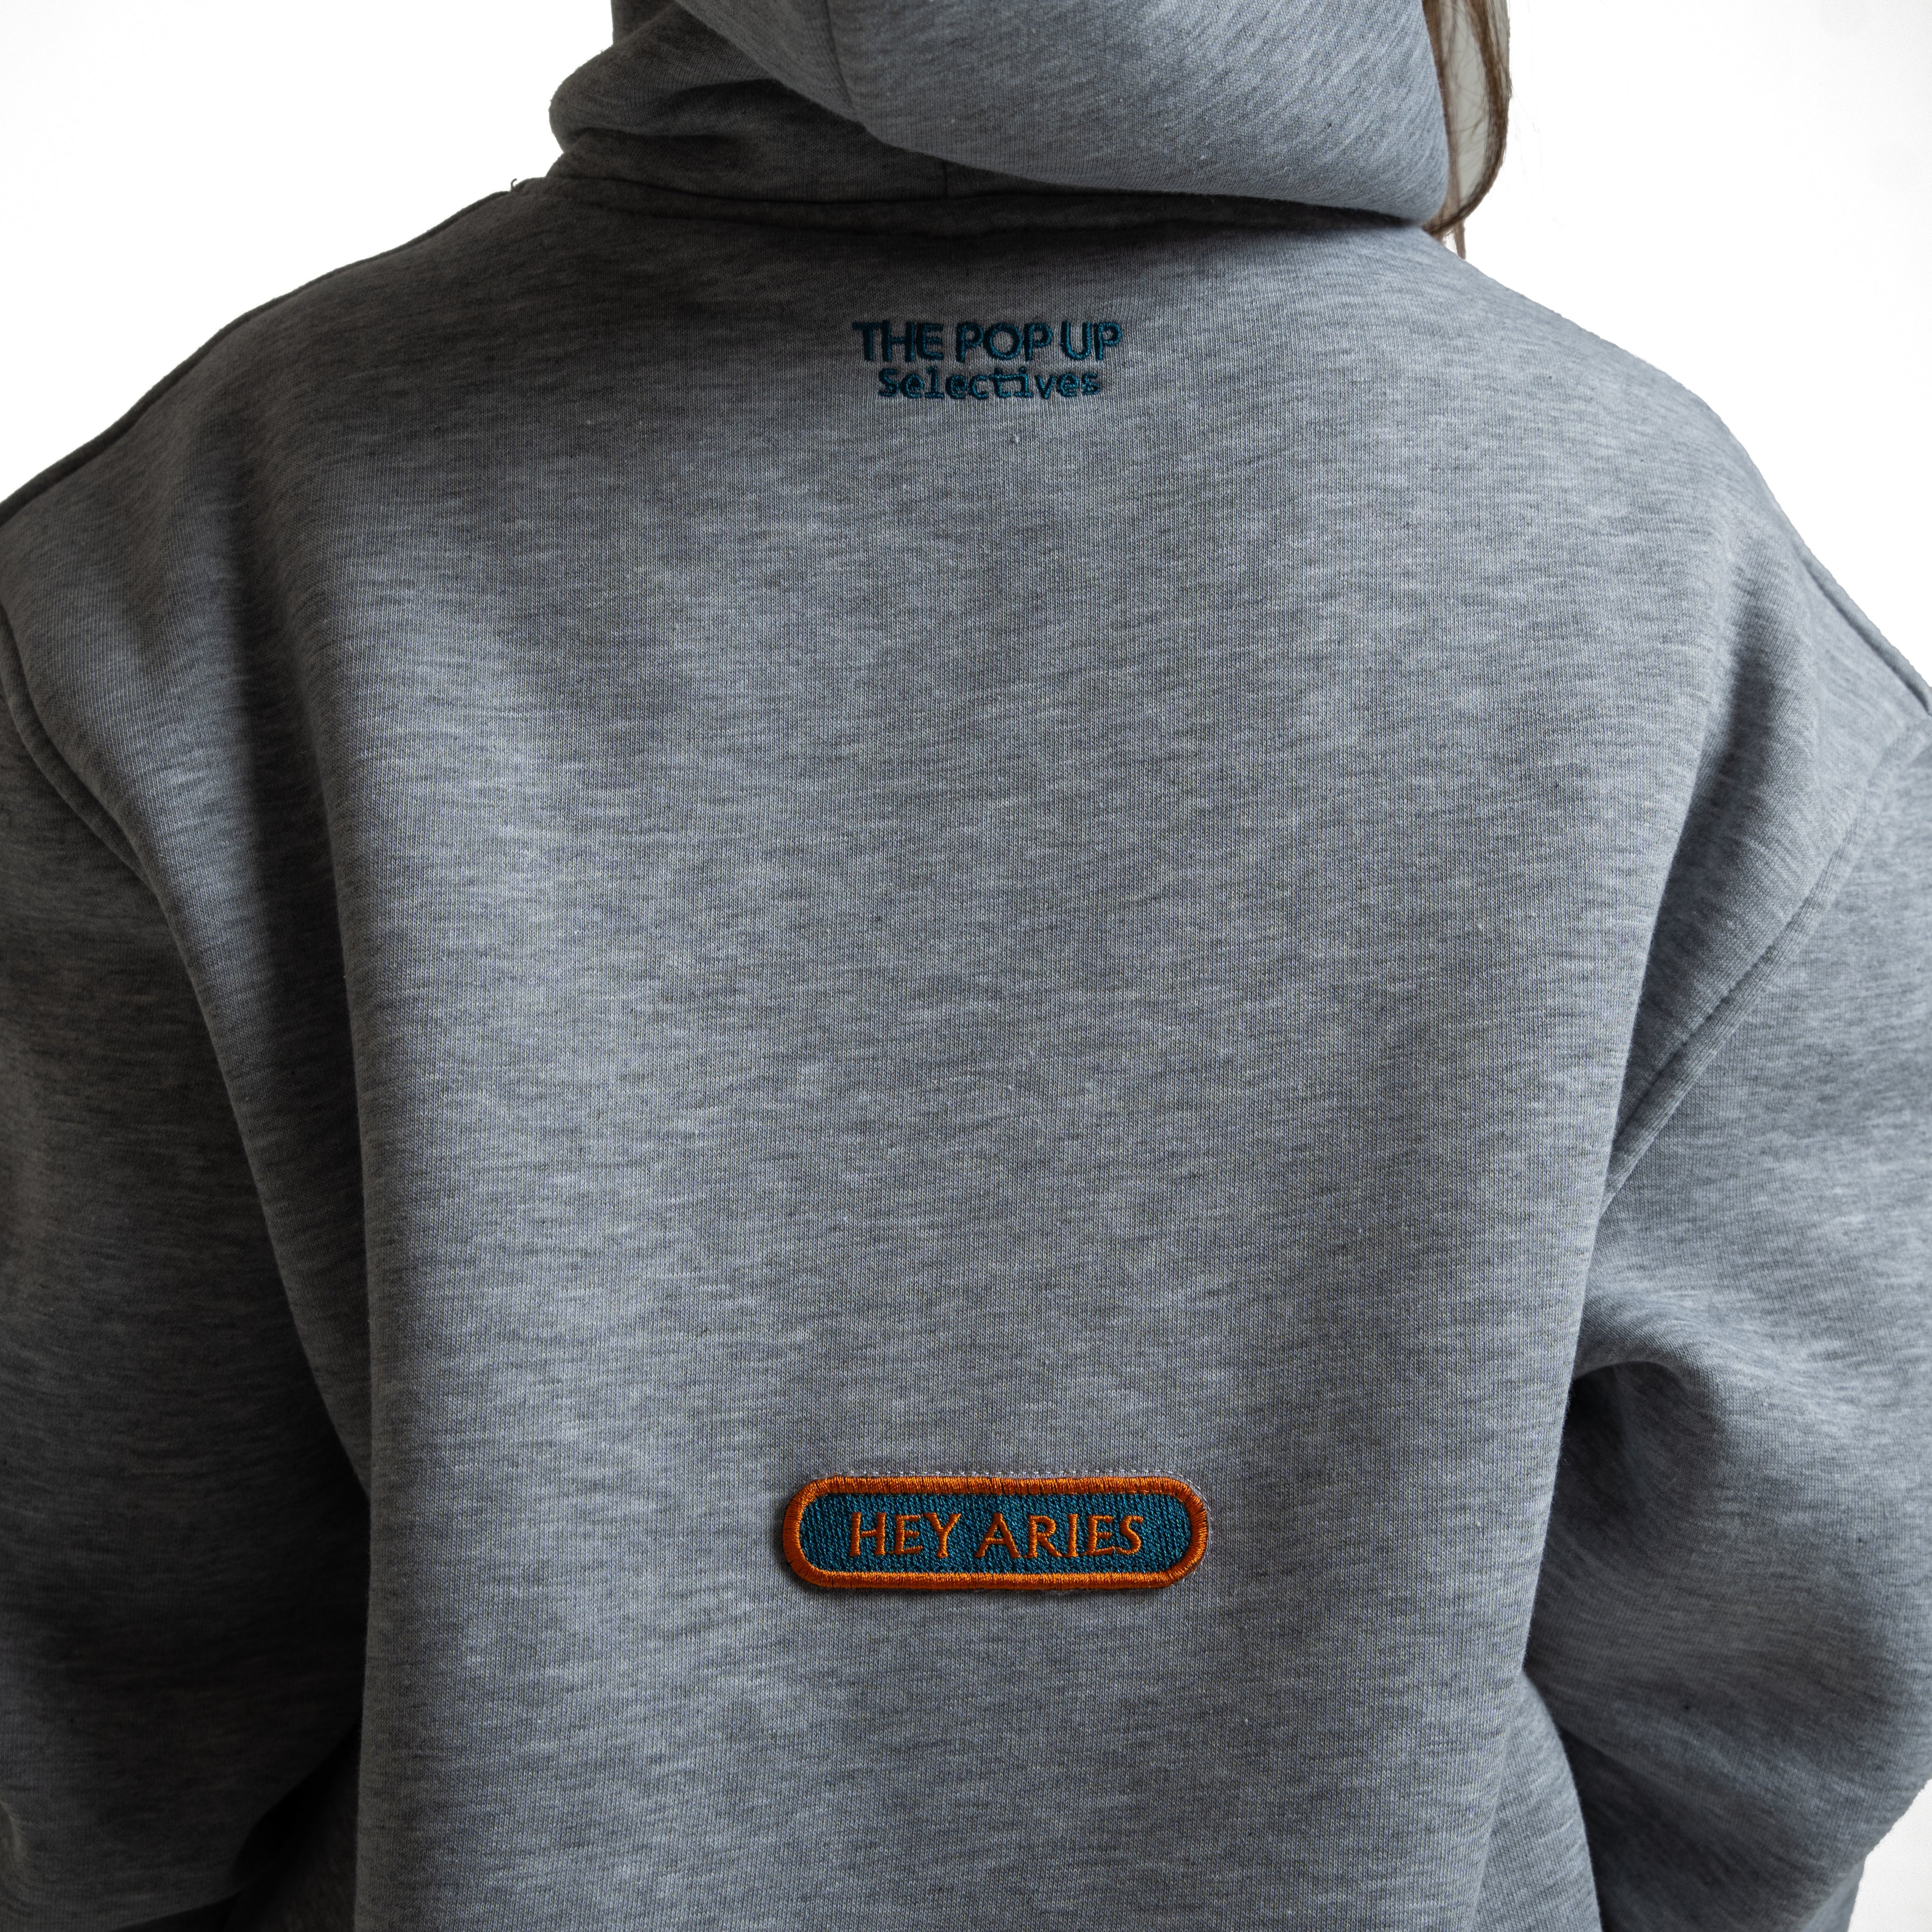 The Pop Up Selectives Aries Hoodie